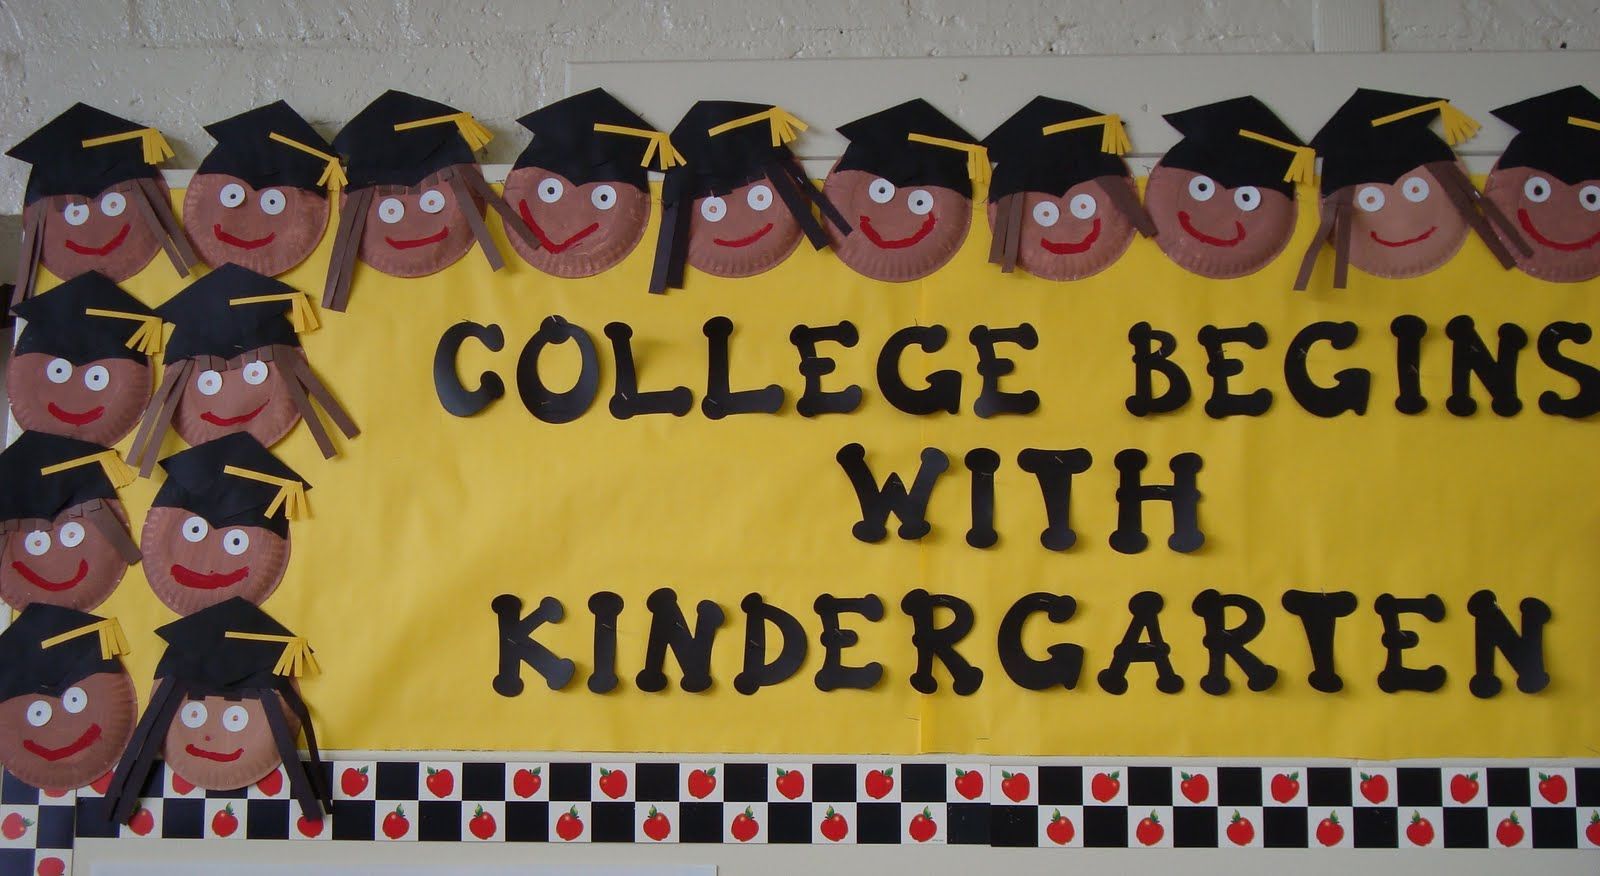 Bulletin board (could be for Pre-K graduation as well; maybe use photos of faces